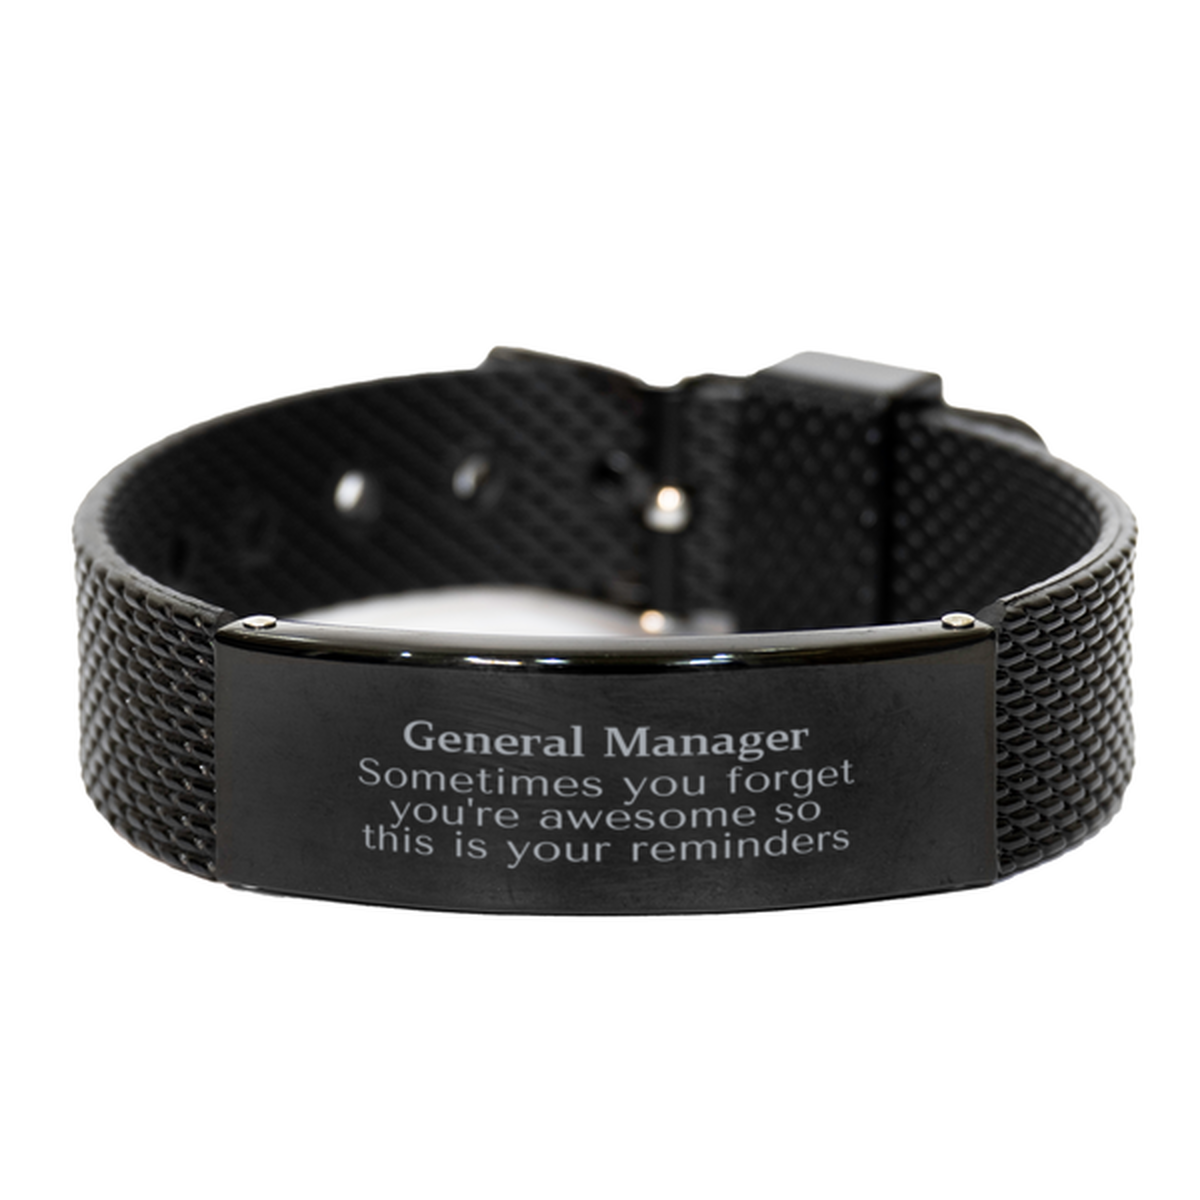 Sentimental General Manager Black Shark Mesh Bracelet, General Manager Sometimes you forget you're awesome so this is your reminders, Graduation Christmas Birthday Gifts for General Manager, Men, Women, Coworkers